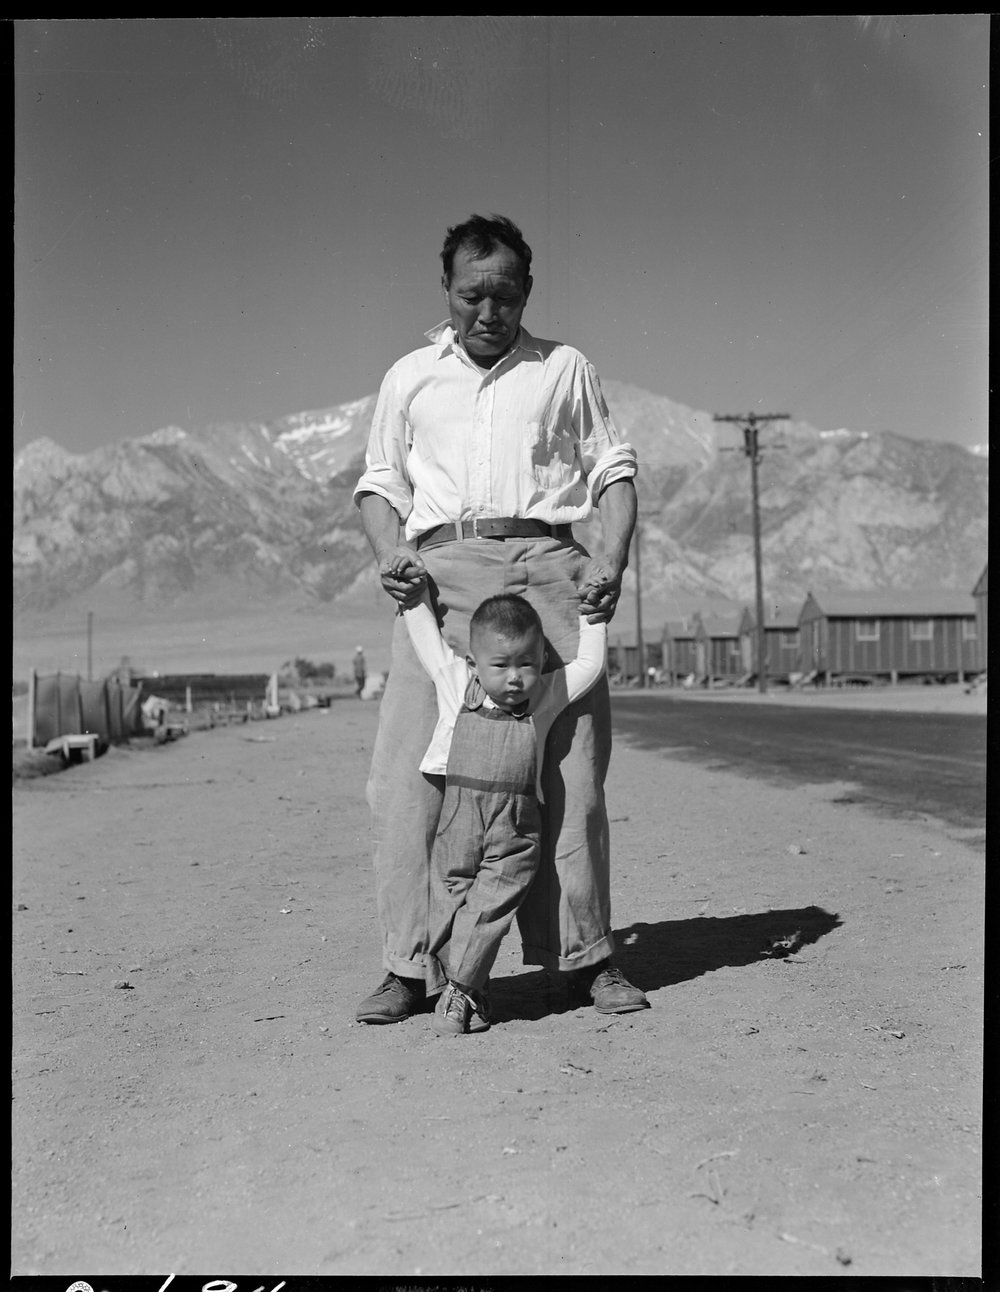 PRINT AVAILABLE July 2, 1942 — Manzanar Relocation Center, Manzanar, California. Grandfather of Japanese ancestry teaching his little grandson to walk at this War Relocation Authority center for evacuees.